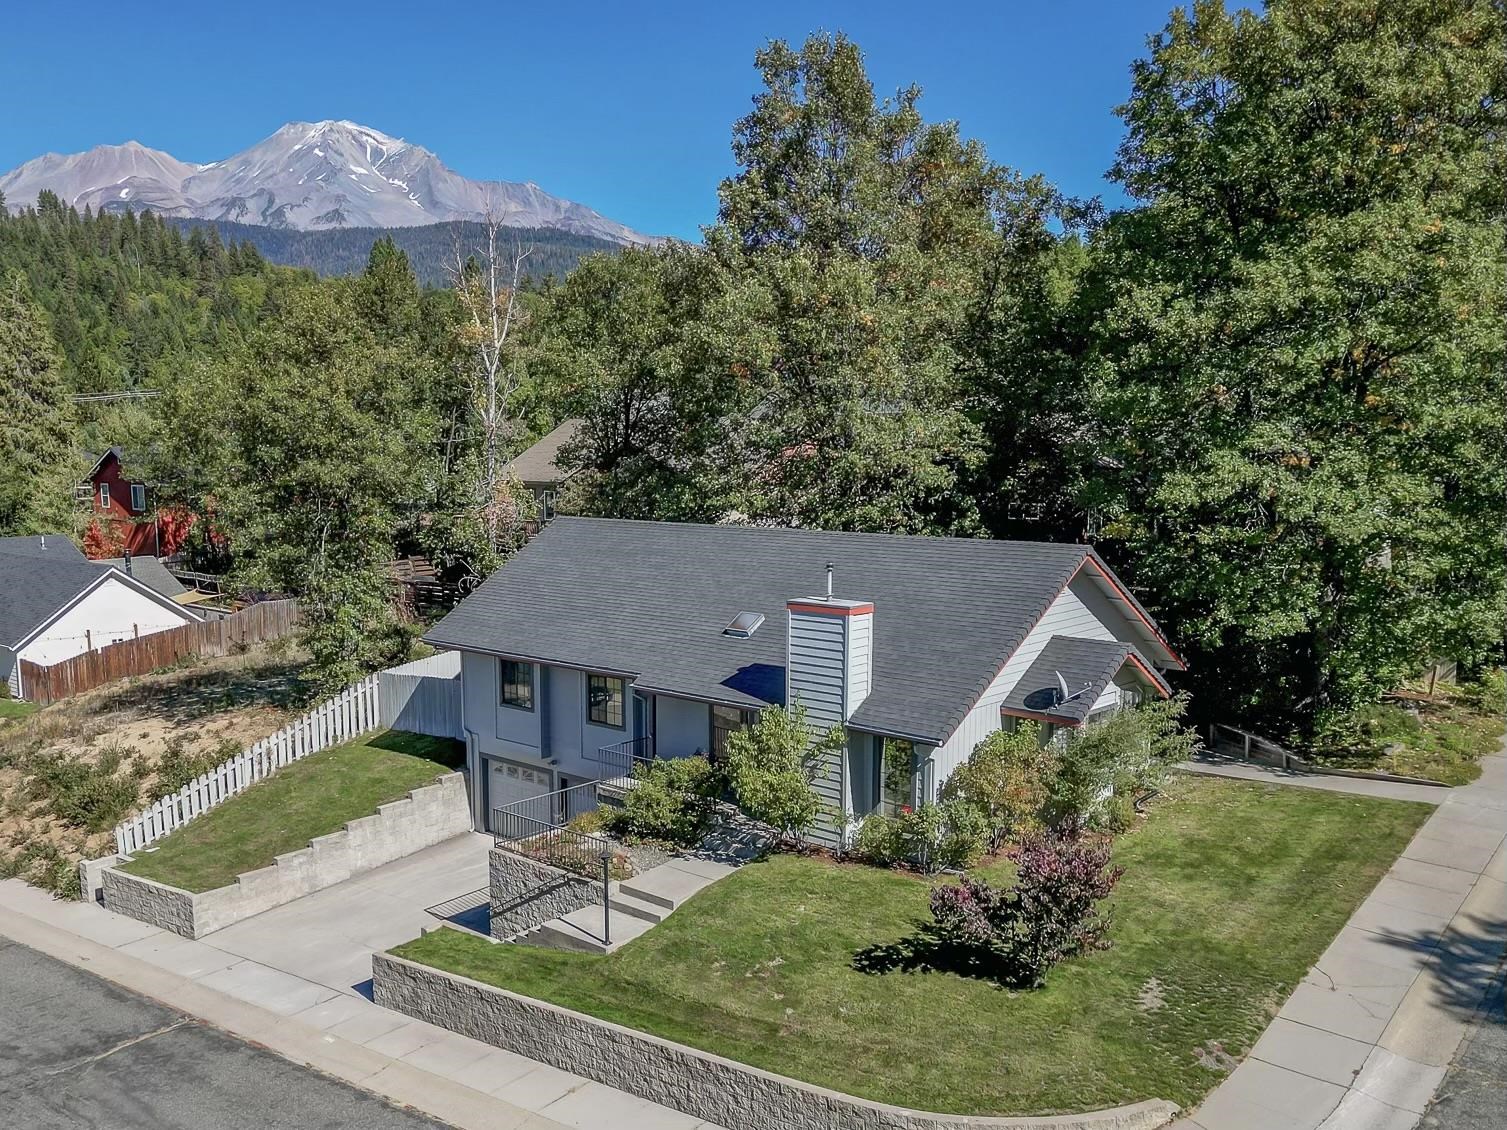 Pride of ownership is evident in this immaculate 1,676/+658 sq ft, 3 bed & 3 full bath Mt. Shasta home. Enter the living room with vaulted ceilings, gorgeous Ravelli pellet stove (with brick surround), skylight, ceiling fan & bay window. The spacious dining room with sliding glass door to outside patio + small deck is wonderful for entertaining. The charming bright eat-in kitchen features new flooring, oak cabinets, dishwasher, refrigerator, microwave, electric range, built in desk & garbage disposal. A beautiful Master Suite includes a walk-in closet, ceiling fan, attached bathroom with walk-in shower and sliding doors with access to the back patio. The 658 sq ft downstairs basement gives you the opportunity for ample storage which could easily be converted into more living space with laundry & full bathroom. The yard is easily maintained with perennials, trees & landscaping. F/A propane heat & AC. Bonus items: Generac home generator, sprinkler system, security system, dumbwaiter for pellet stove & oversized 2 car garage. Fabulous Mt. Eddy view & peek-a-boo views of Mt. Shasta & Black Butte improve in winter. Enjoy all Mt Shasta has to offer in this corner lot move-in-ready home!